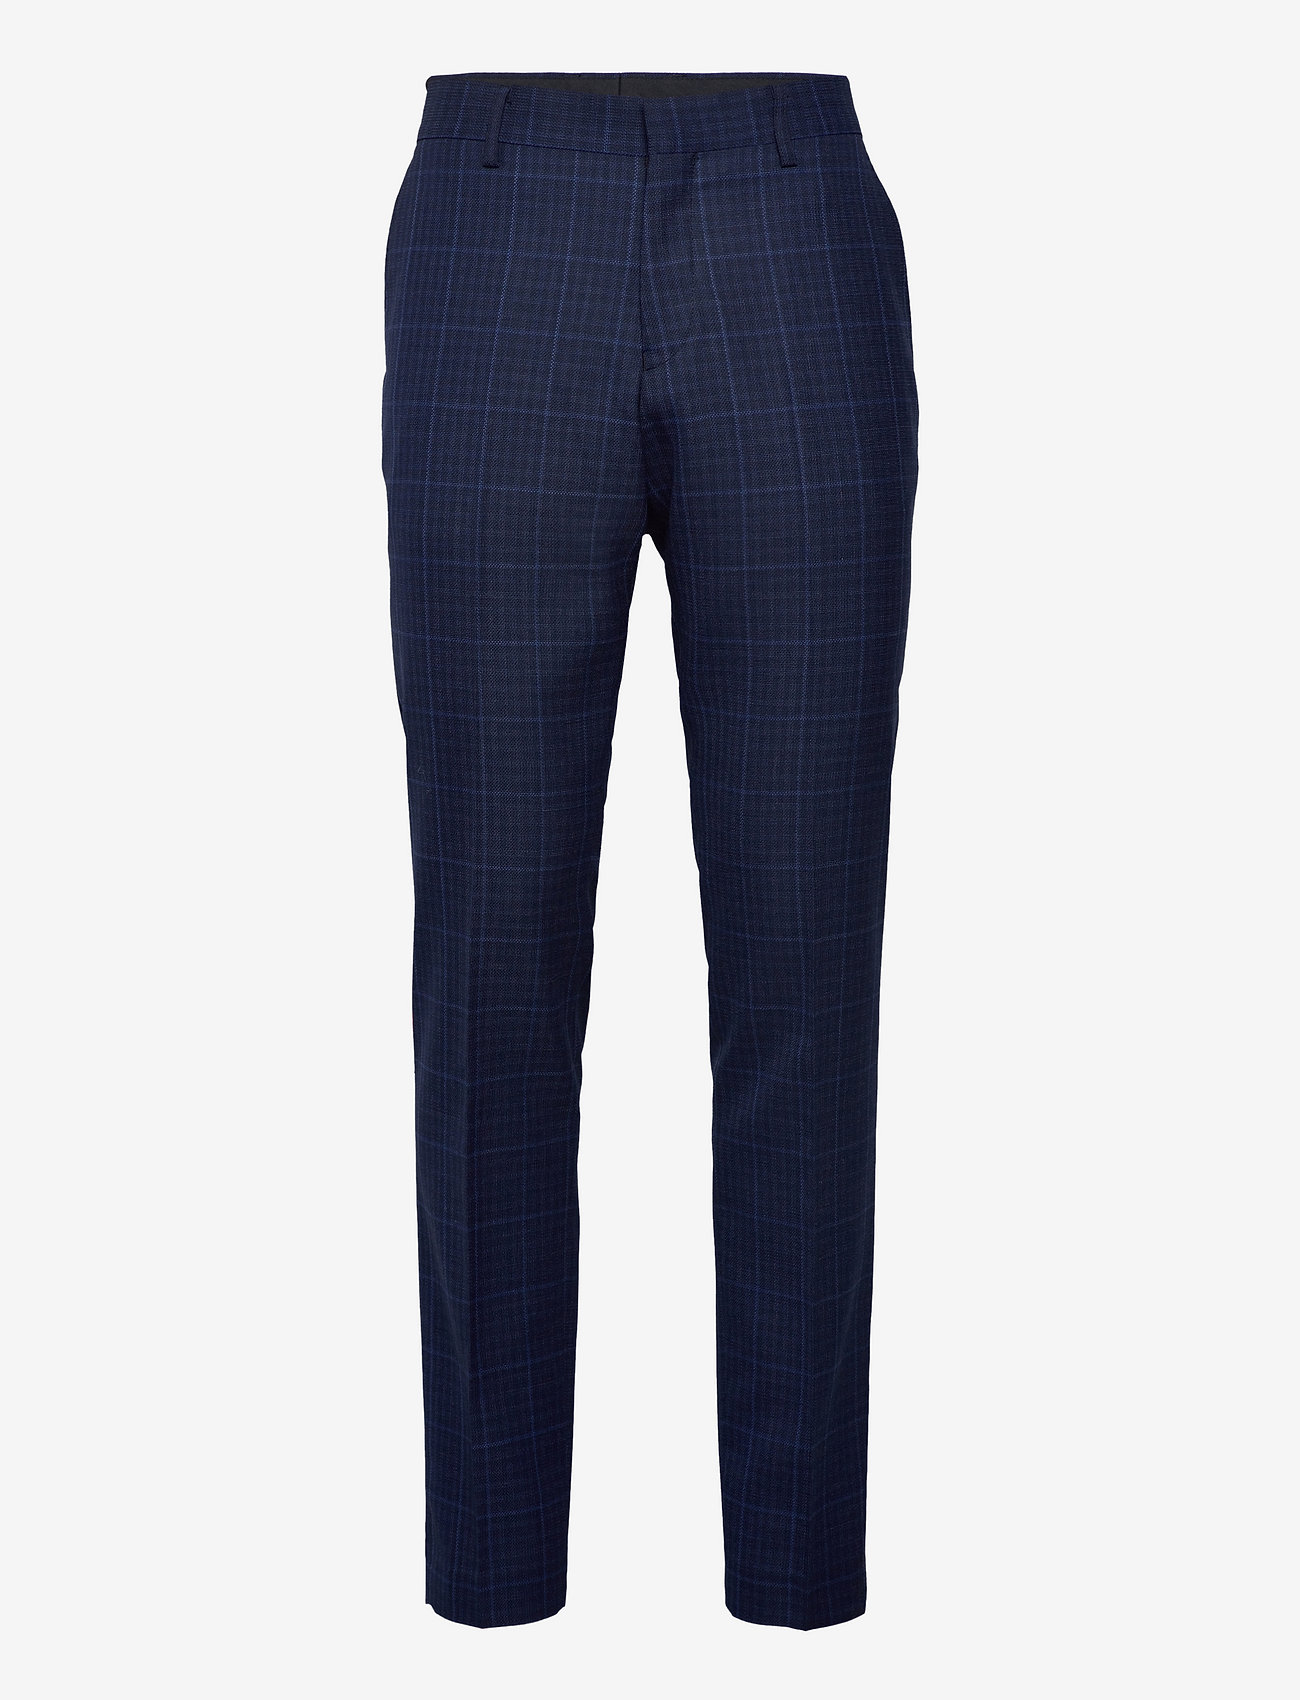 Matinique Malas - Tailored trousers | Boozt.com